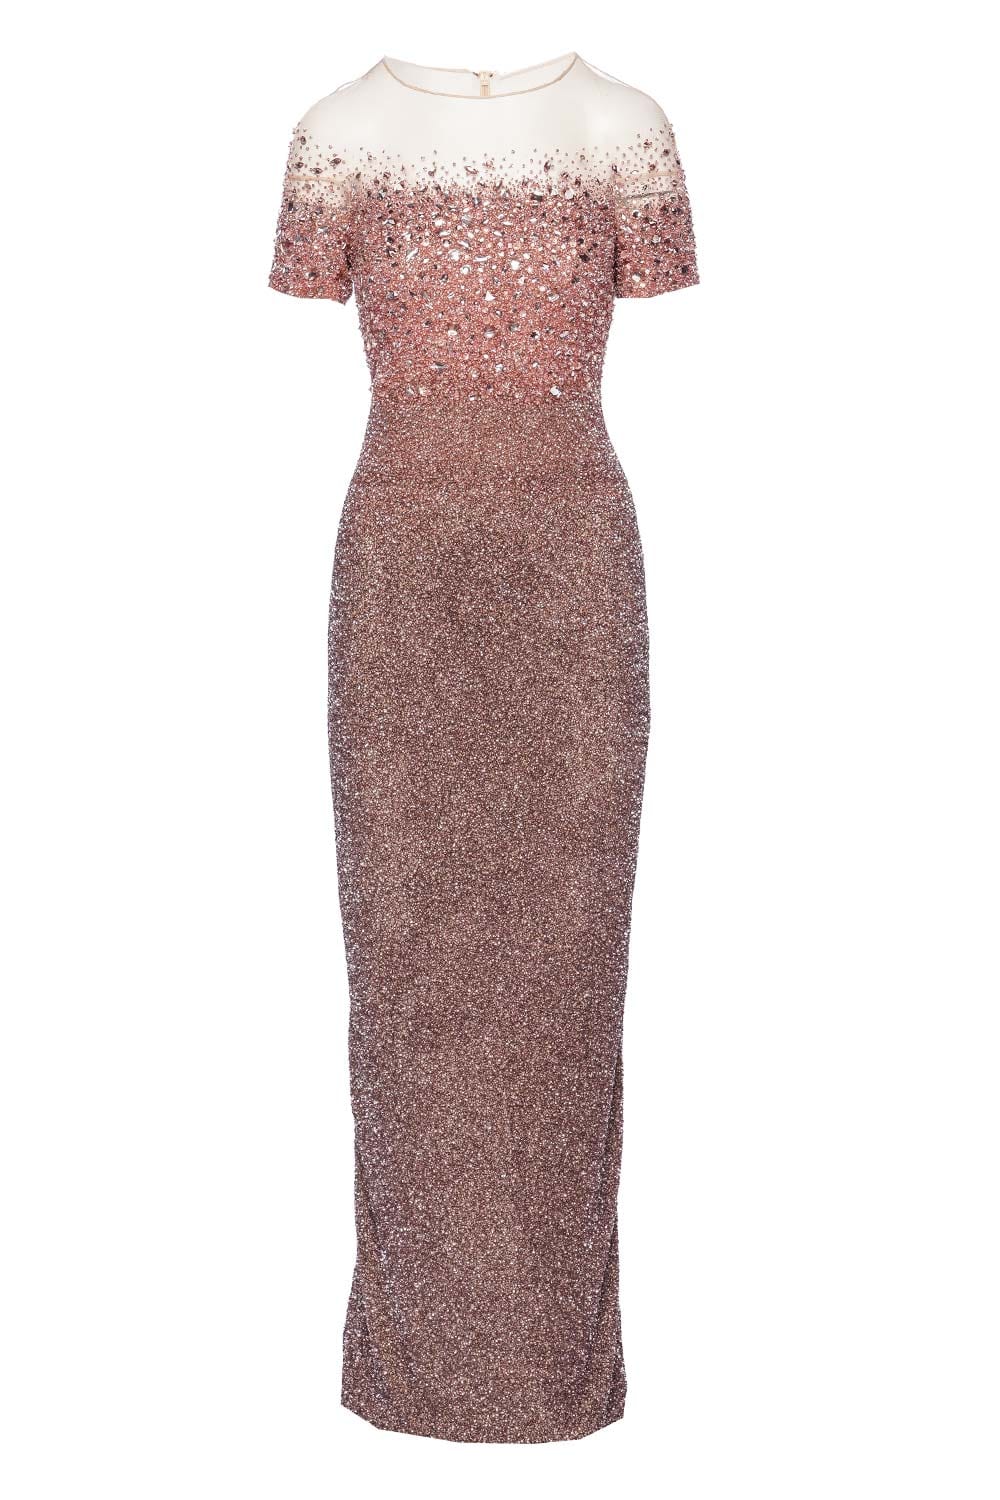 Pamela Roland Ombre Sequin Crystal Gown